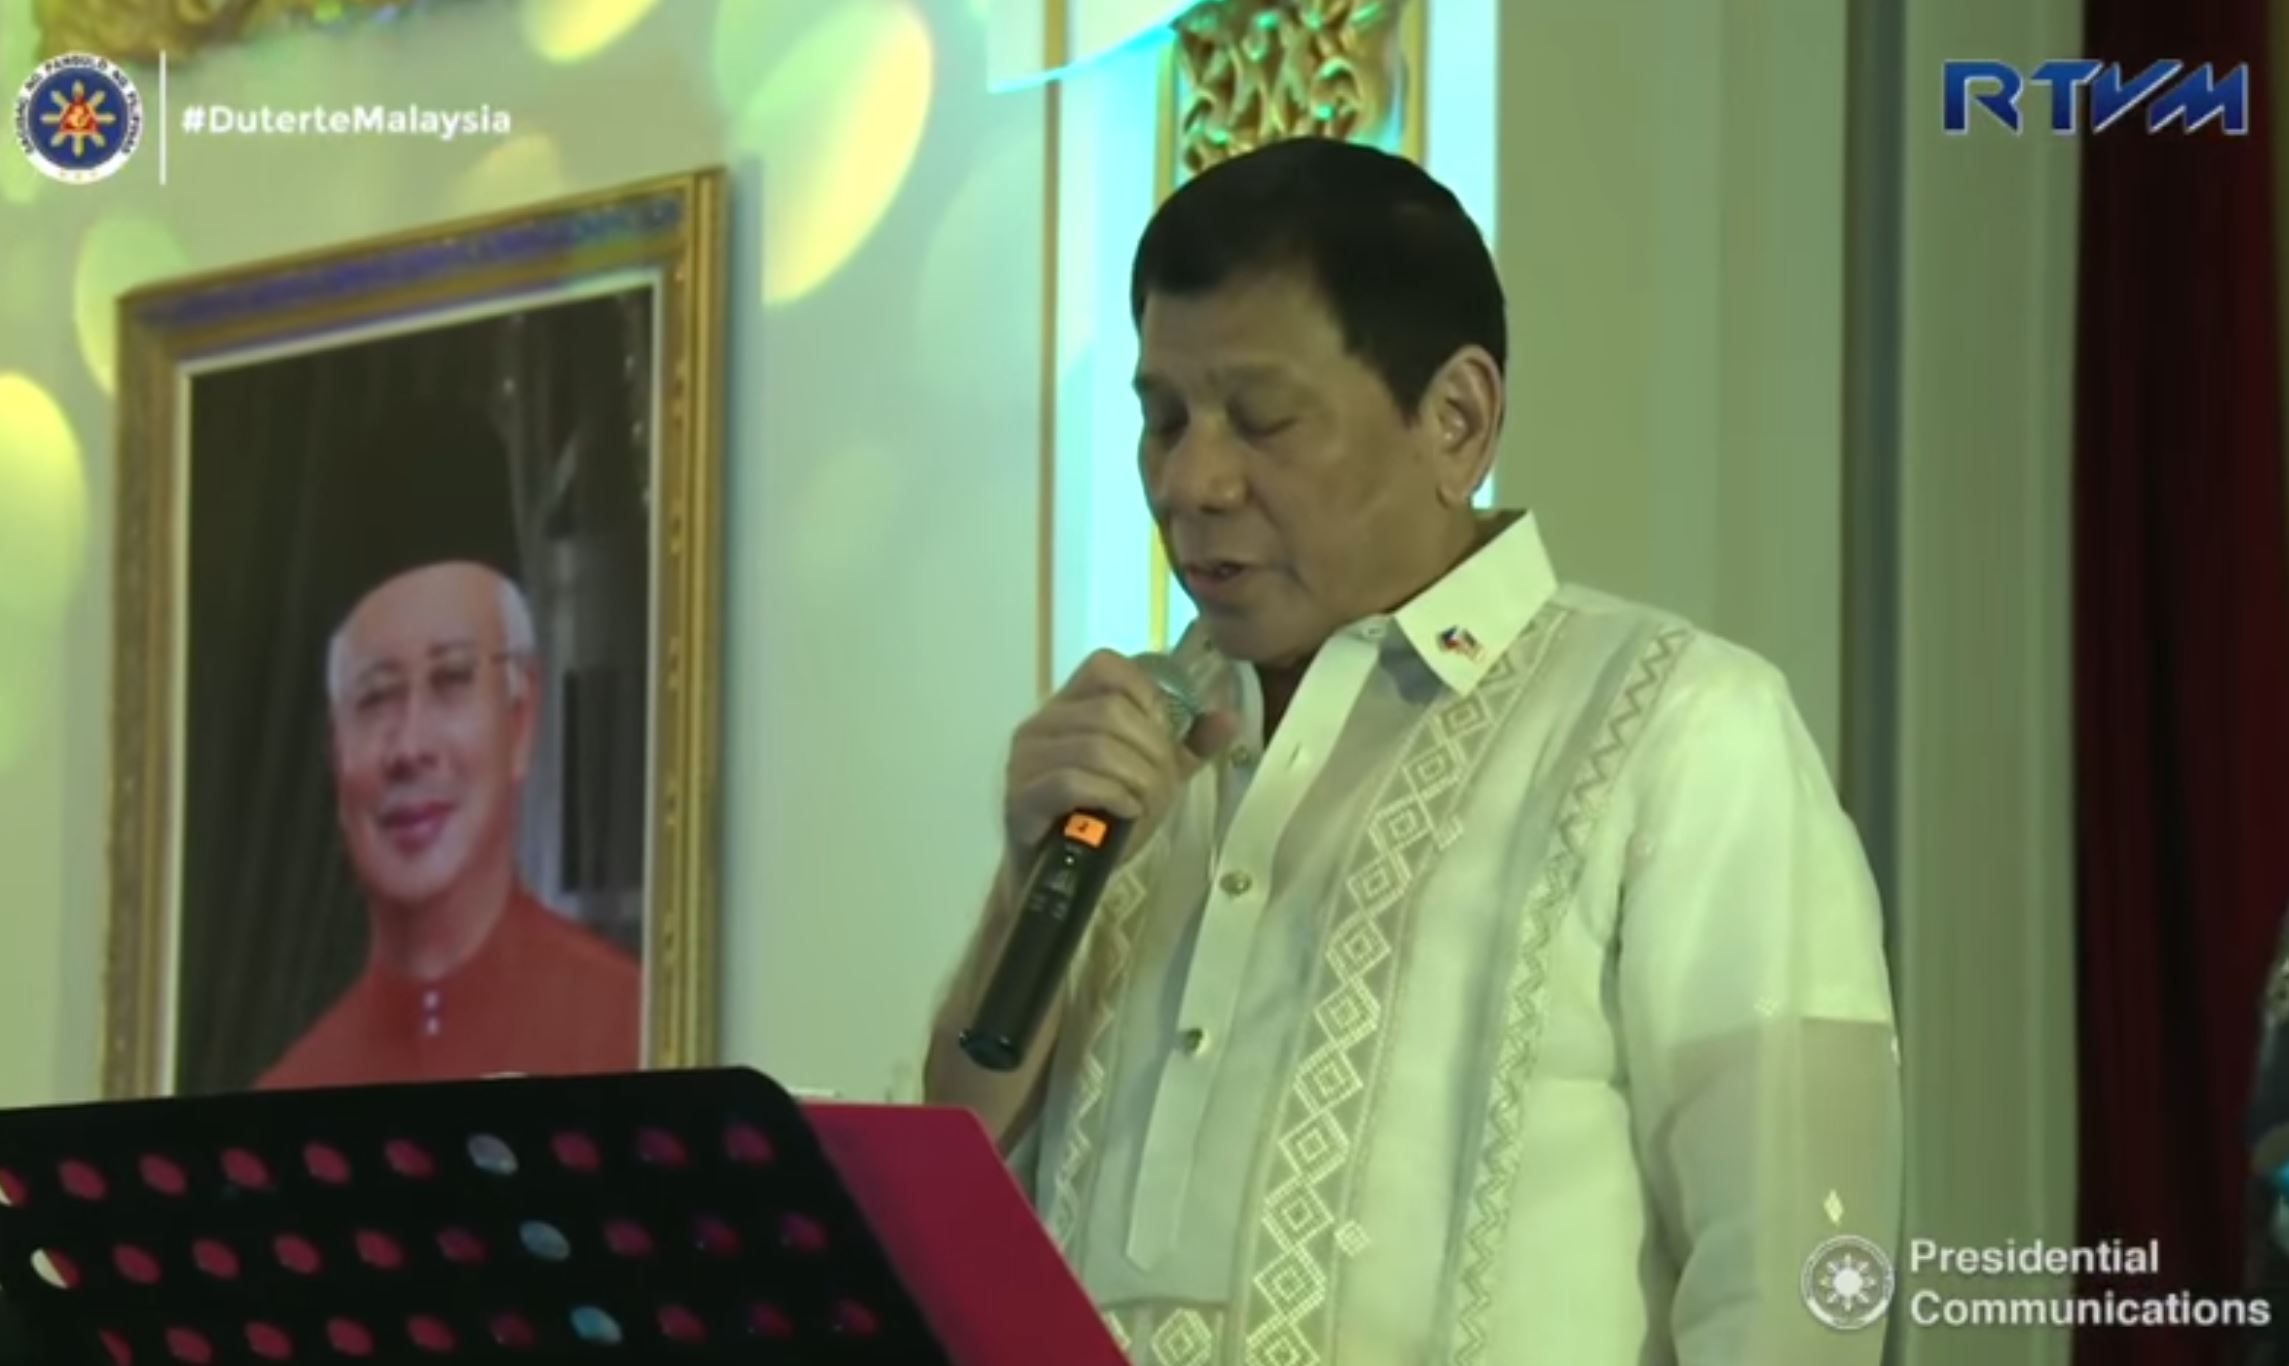 President Duterte singing singing Bette Midler's "Wind Beneath My Wings" during the dinner hosted by Malaysian Prime Minister Najib Razak. (Photo grabbed from RTVM video).